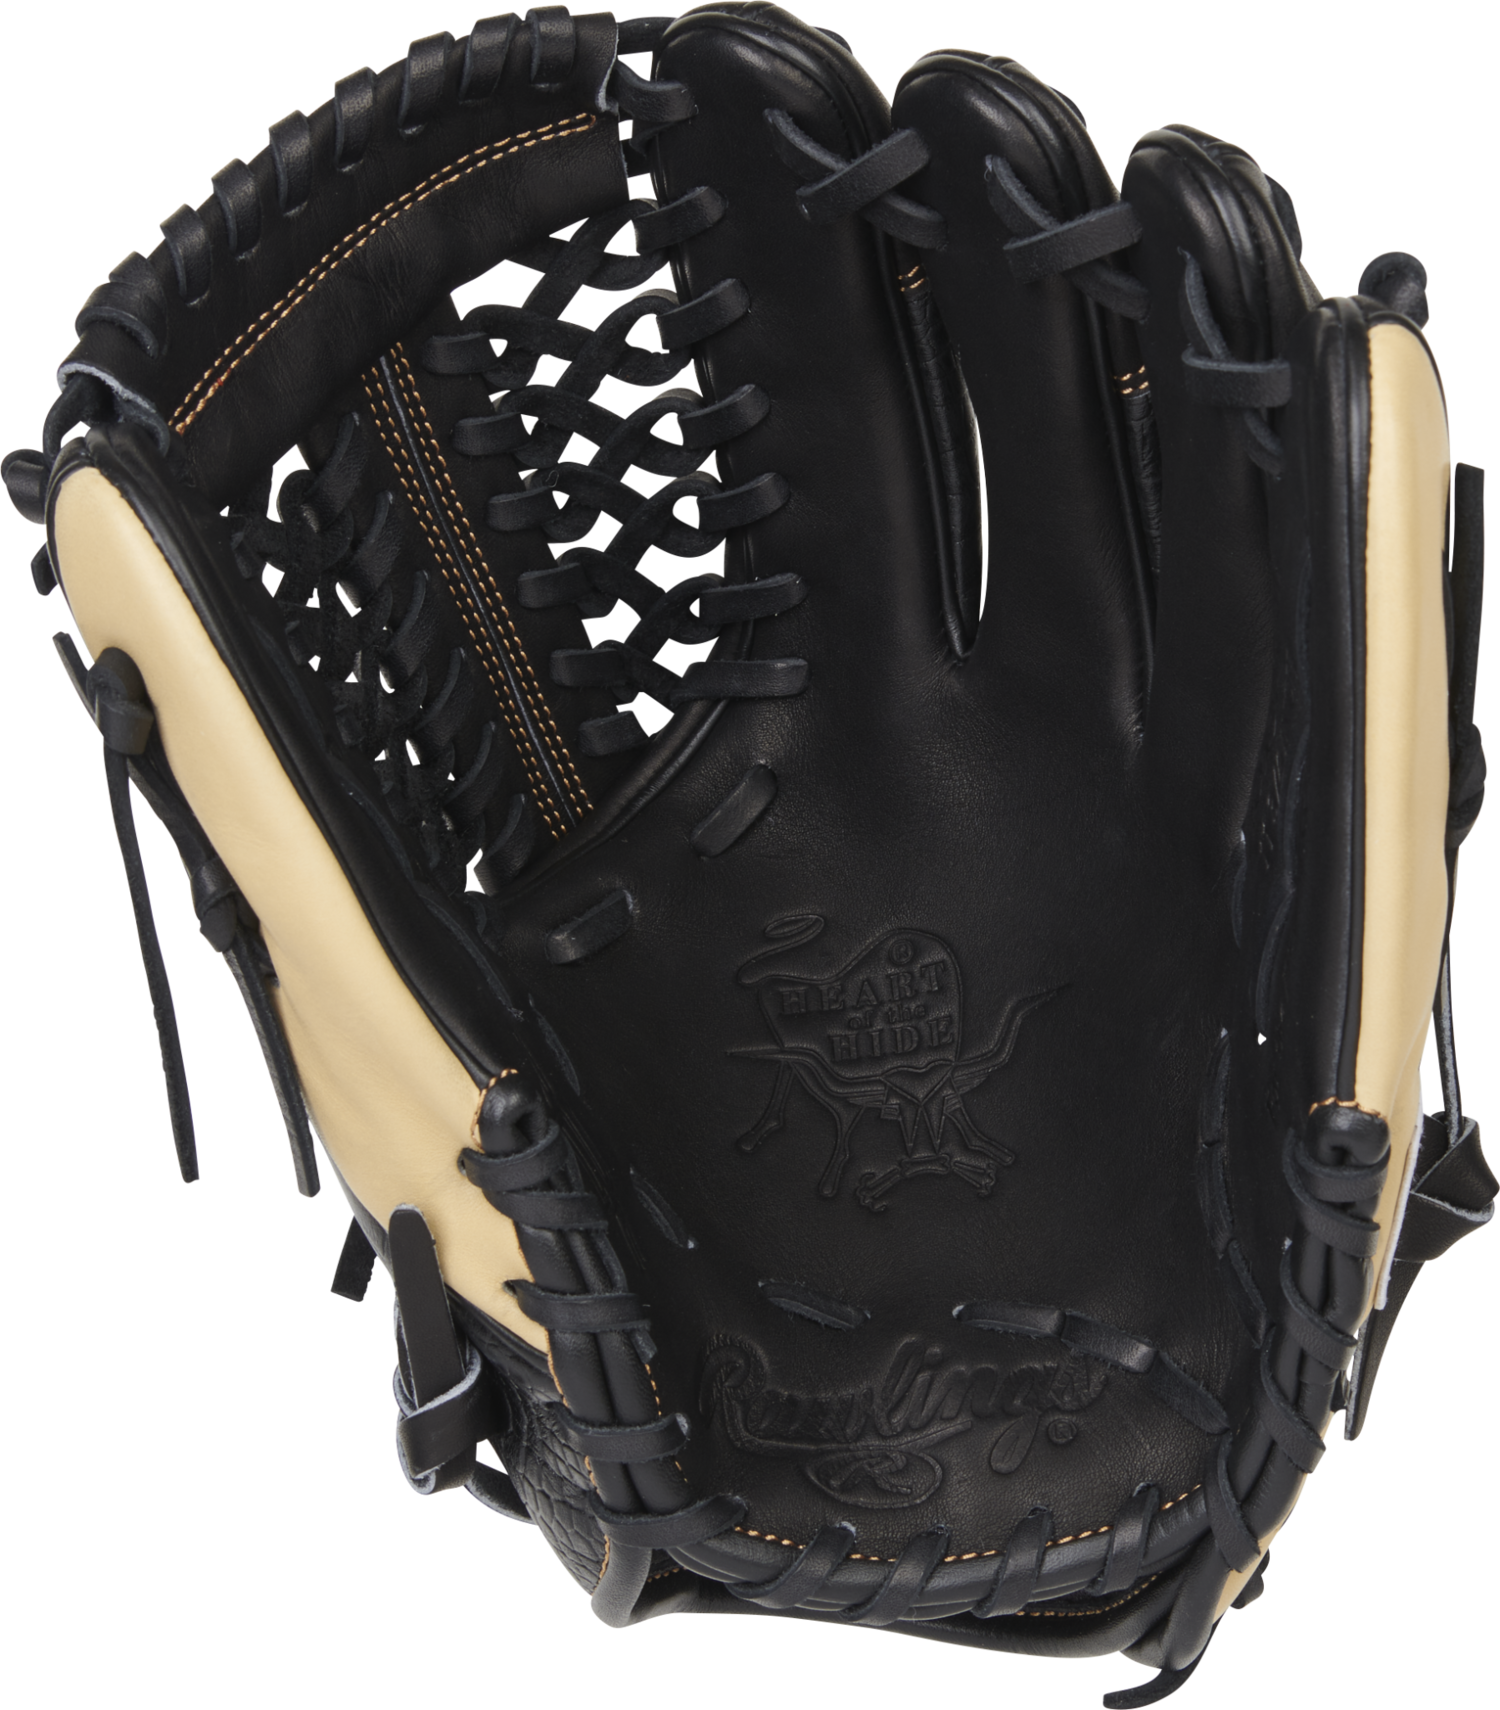 Rawlings Heart of the Hide 12.75-inch Glove - Bryce Harper, Left Hand  Throw